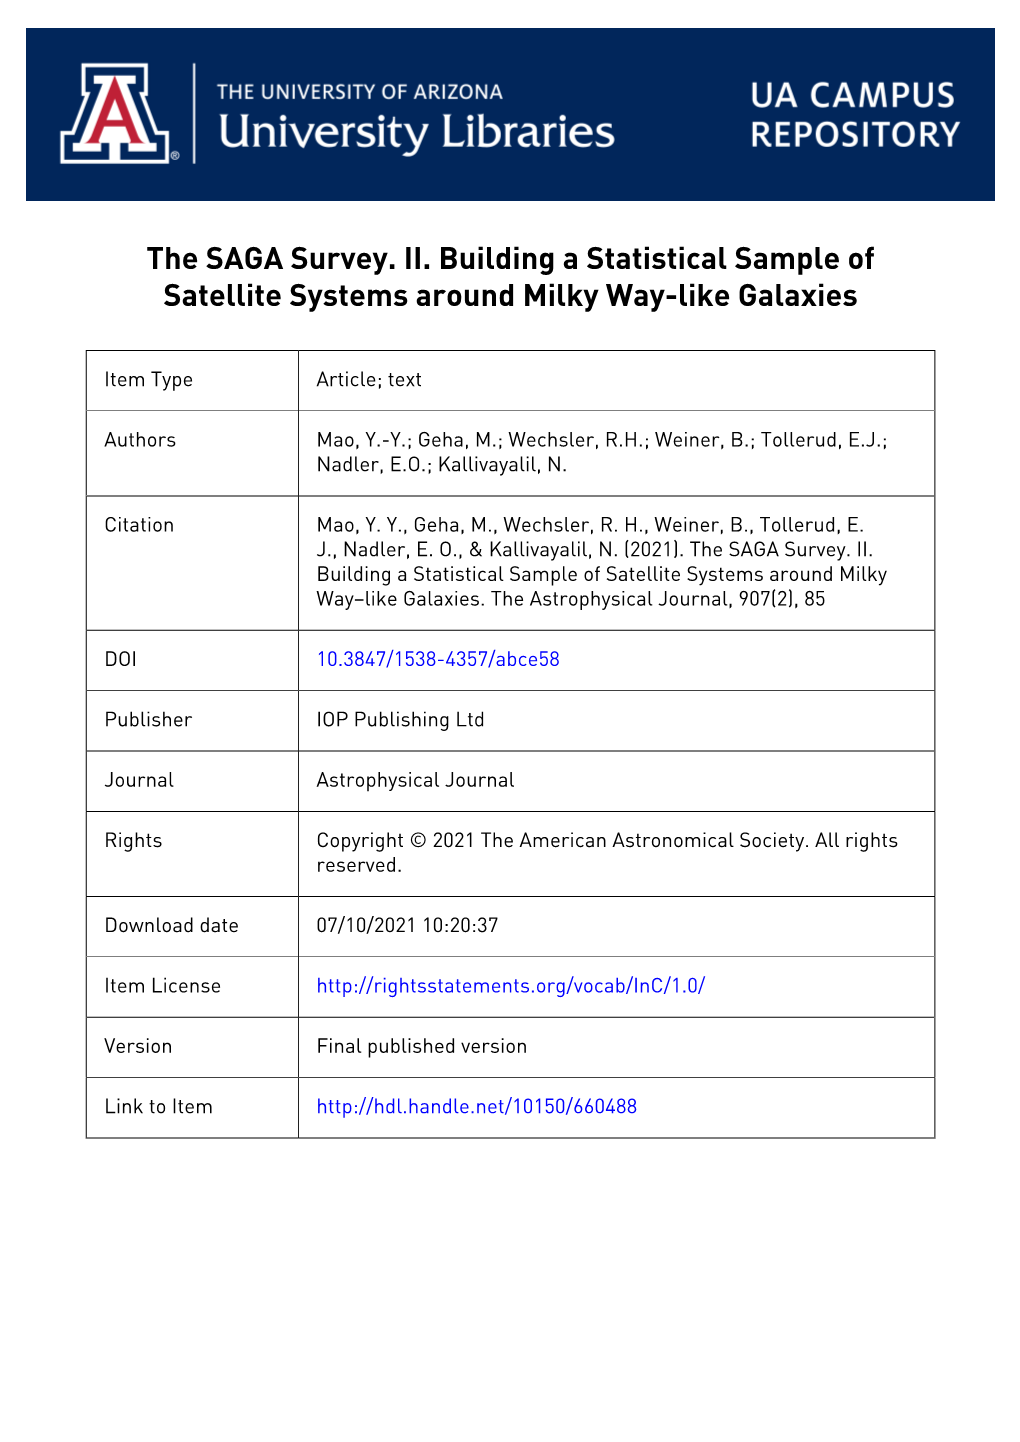 The SAGA Survey. II. Building a Statistical Sample of Satellite Systems Around Milky Way-Like Galaxies